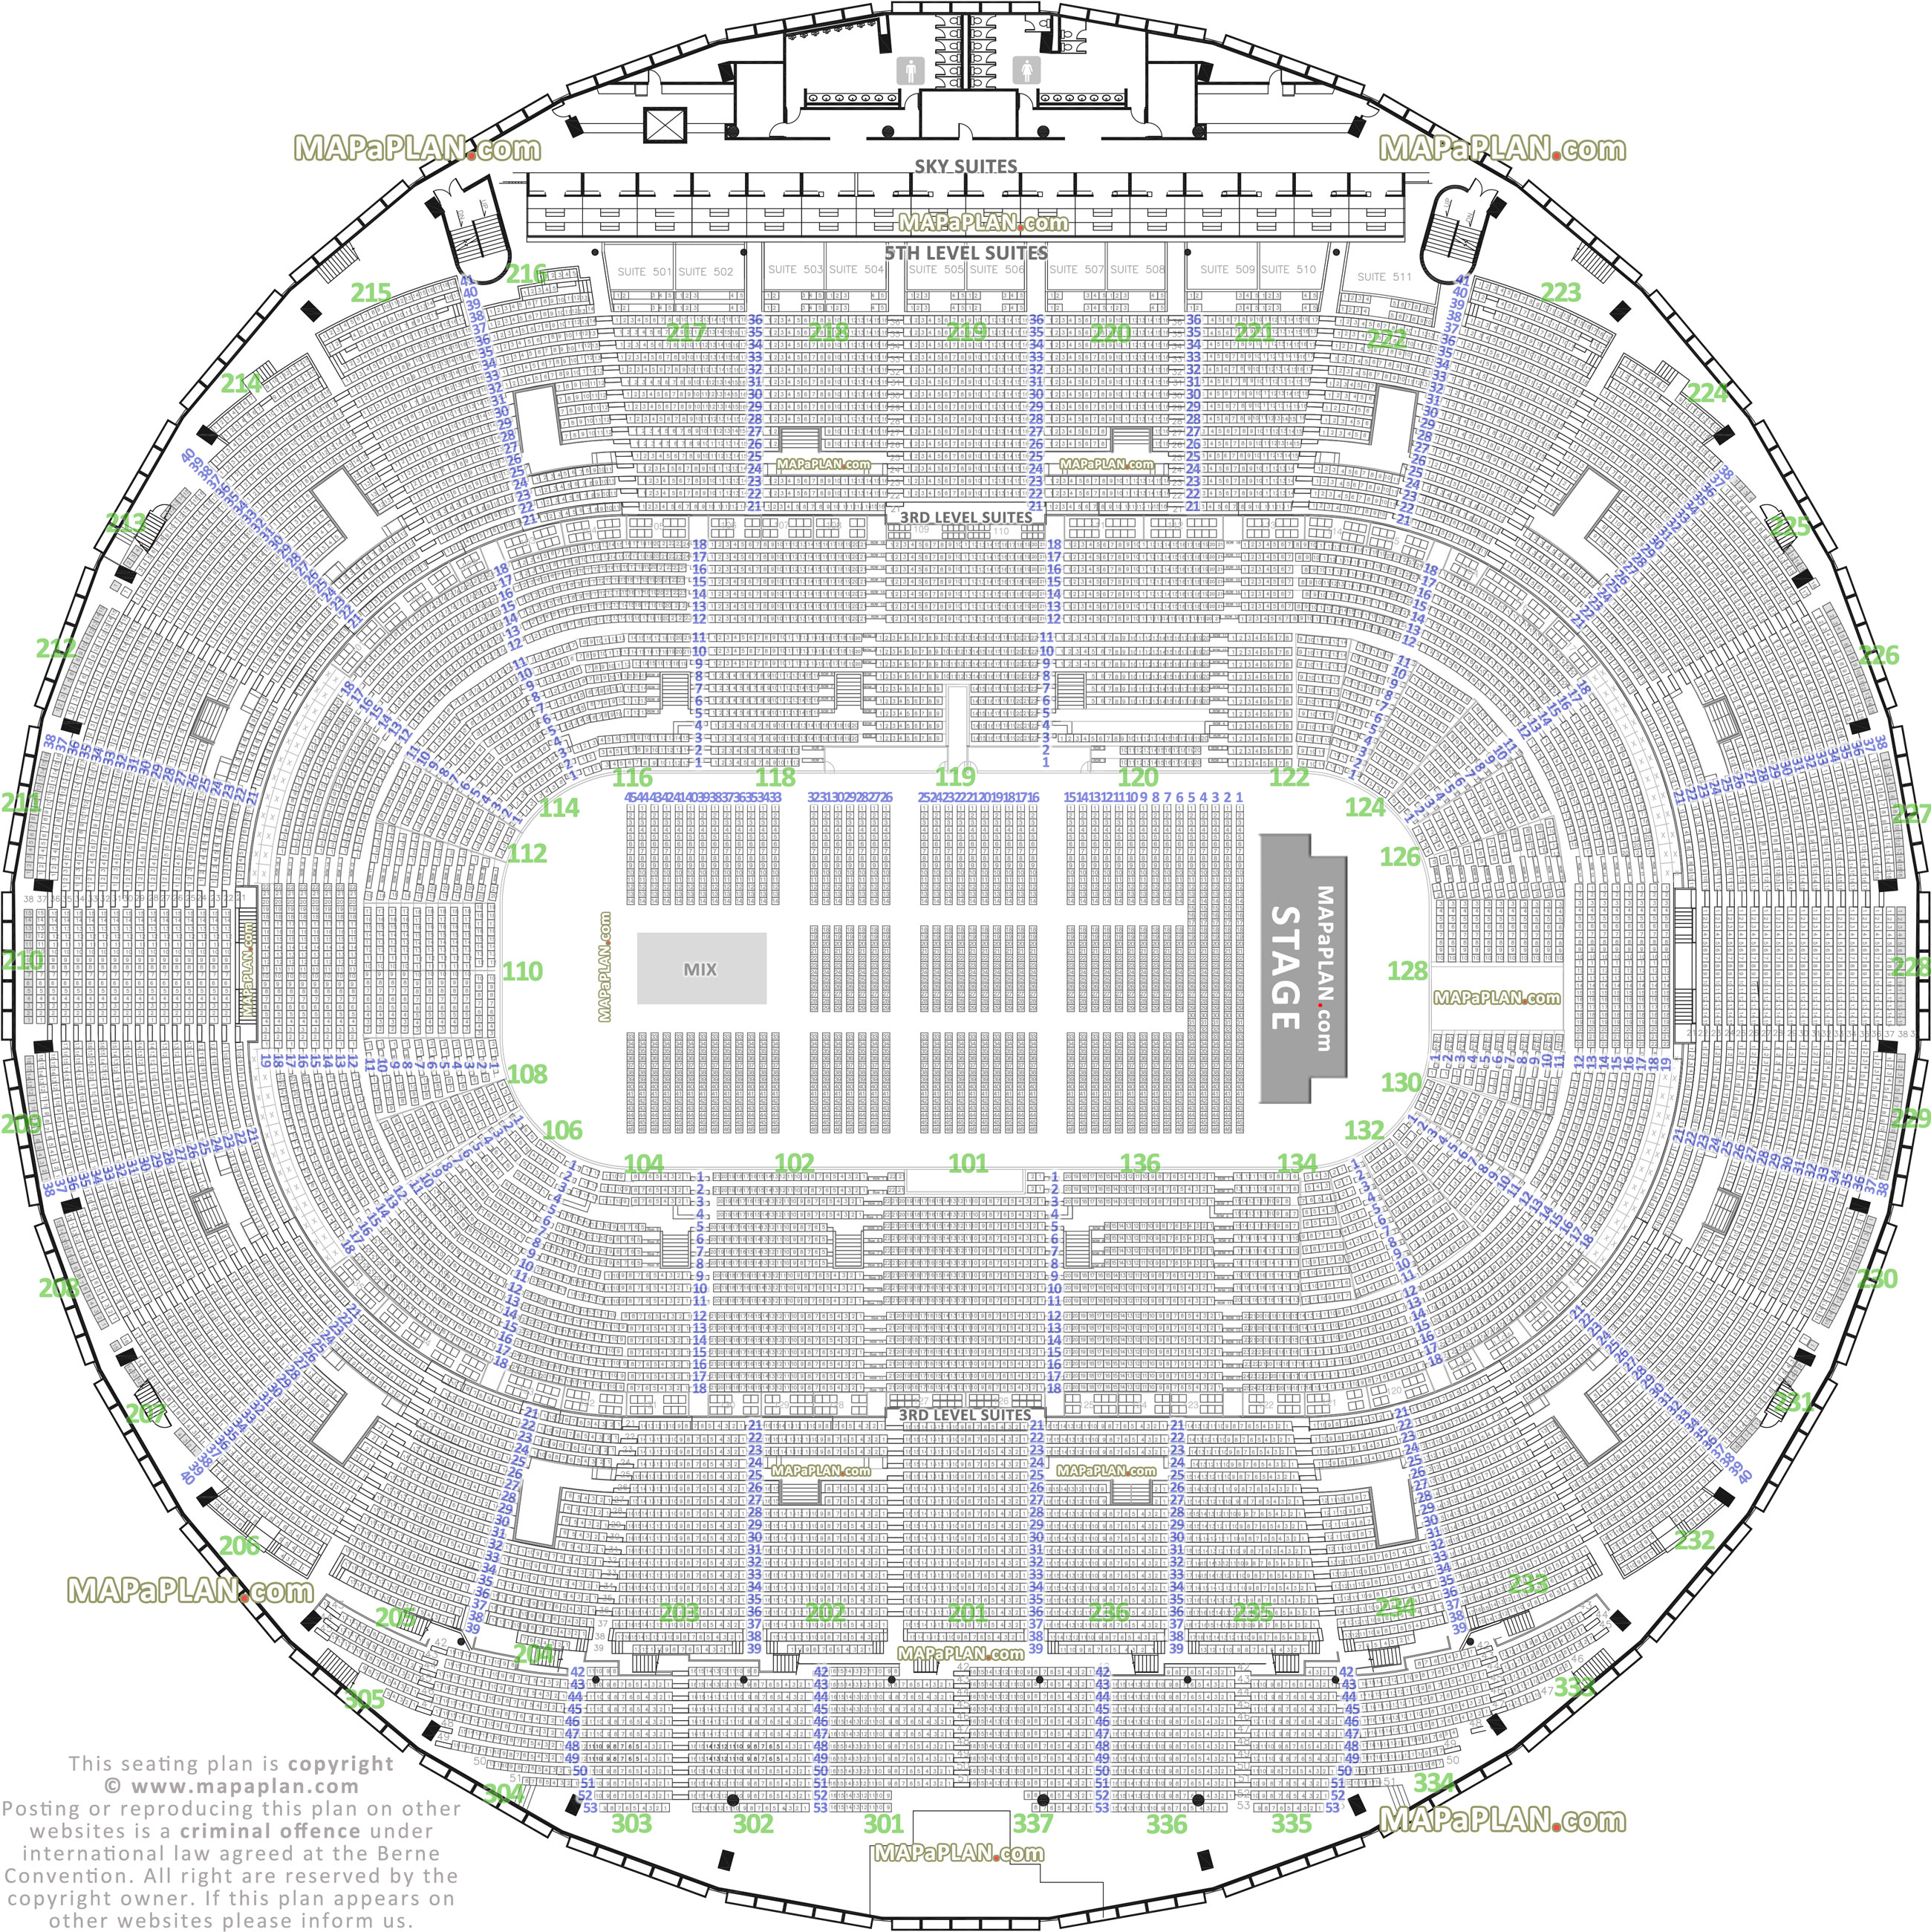 detailed seat row numbers end stage full concert sections floor plan with arena bowl layout Edmonton Northlands Coliseum seating chart